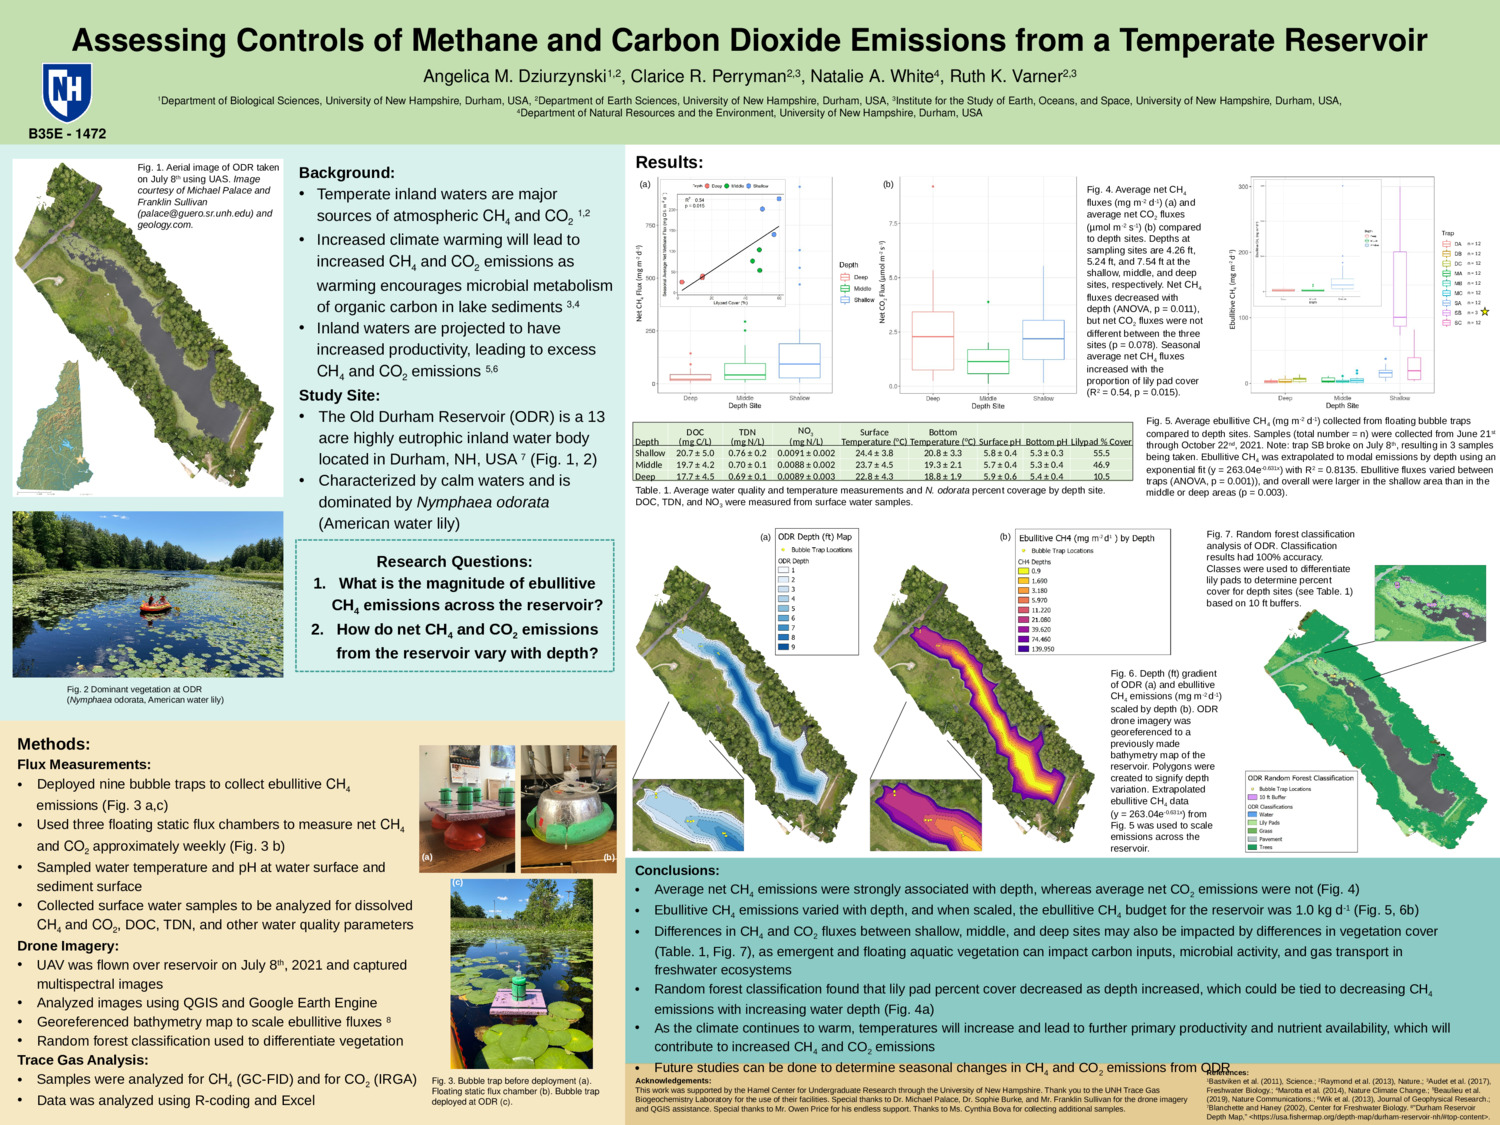 Assessing Controls Of Methane And Carbon Dioxide Emissions From A Temperate Reservoir by amd1121